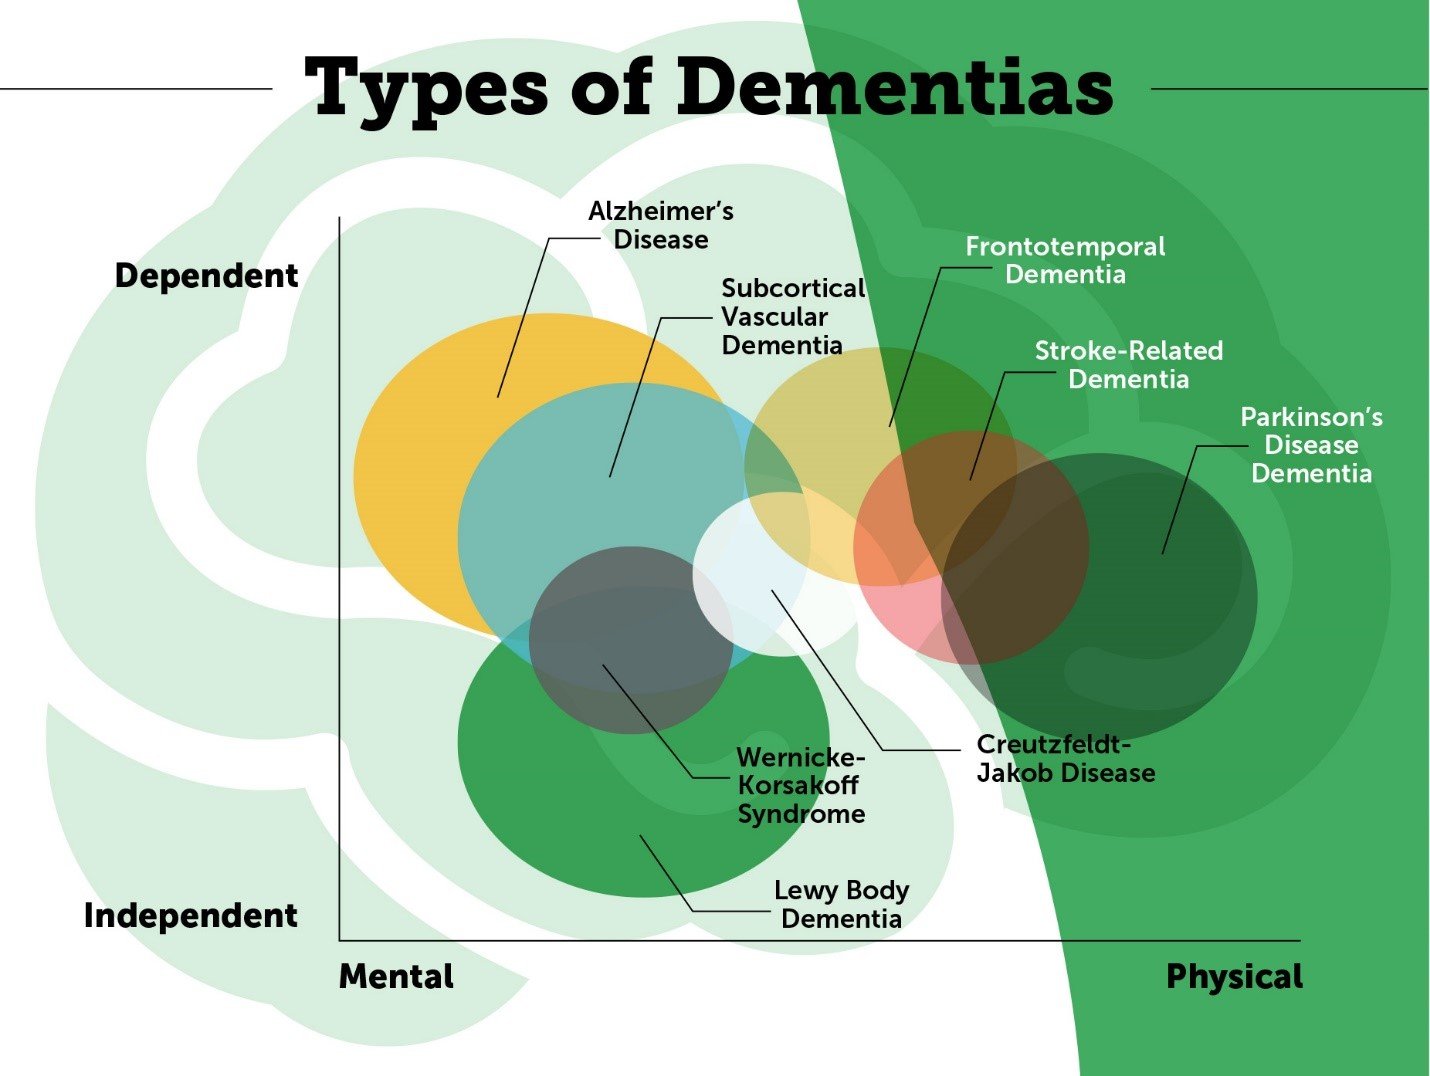 Alzheimerâs Disease 2020 Facts and Statistics